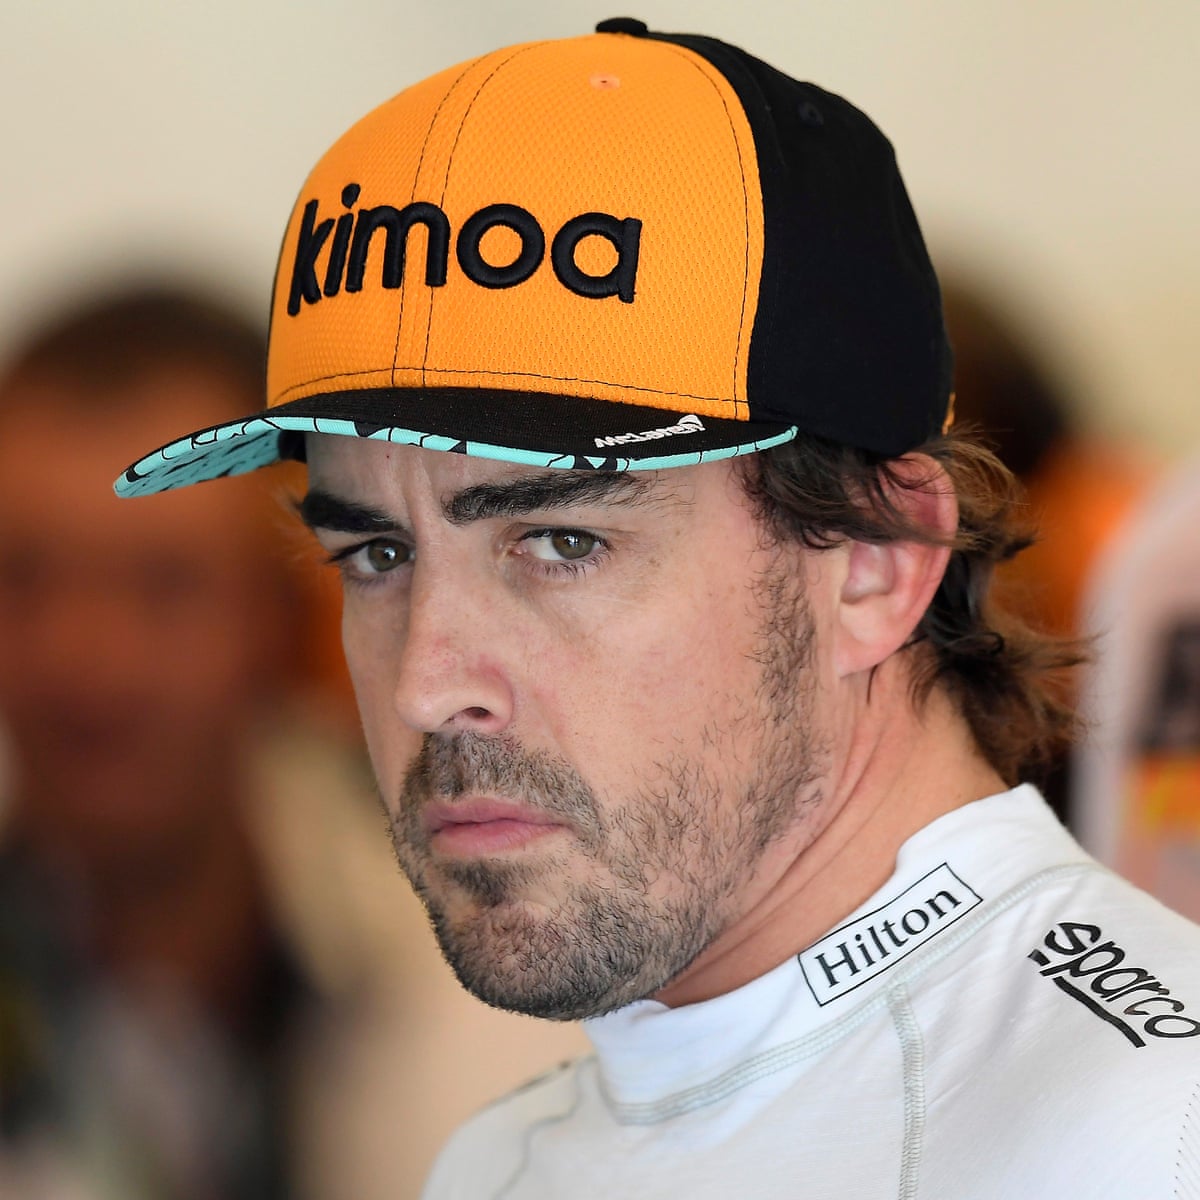 Fernando Alonso to retire from F1 at end of the season after 17 years | Fernando  Alonso | The Guardian